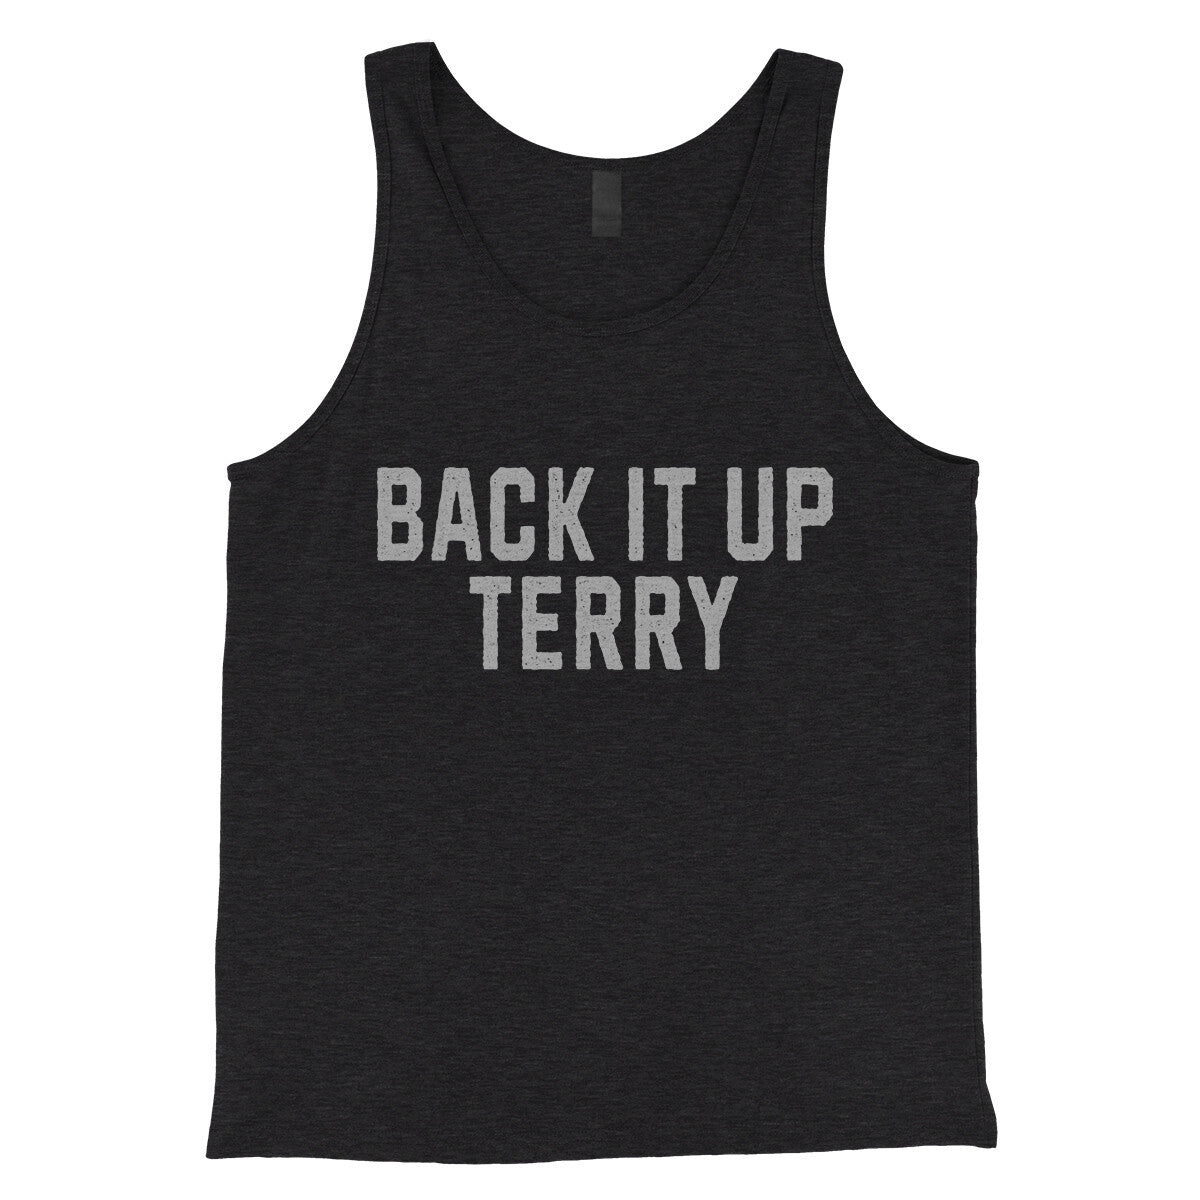 Back it up Terry in Charcoal Black TriBlend Color